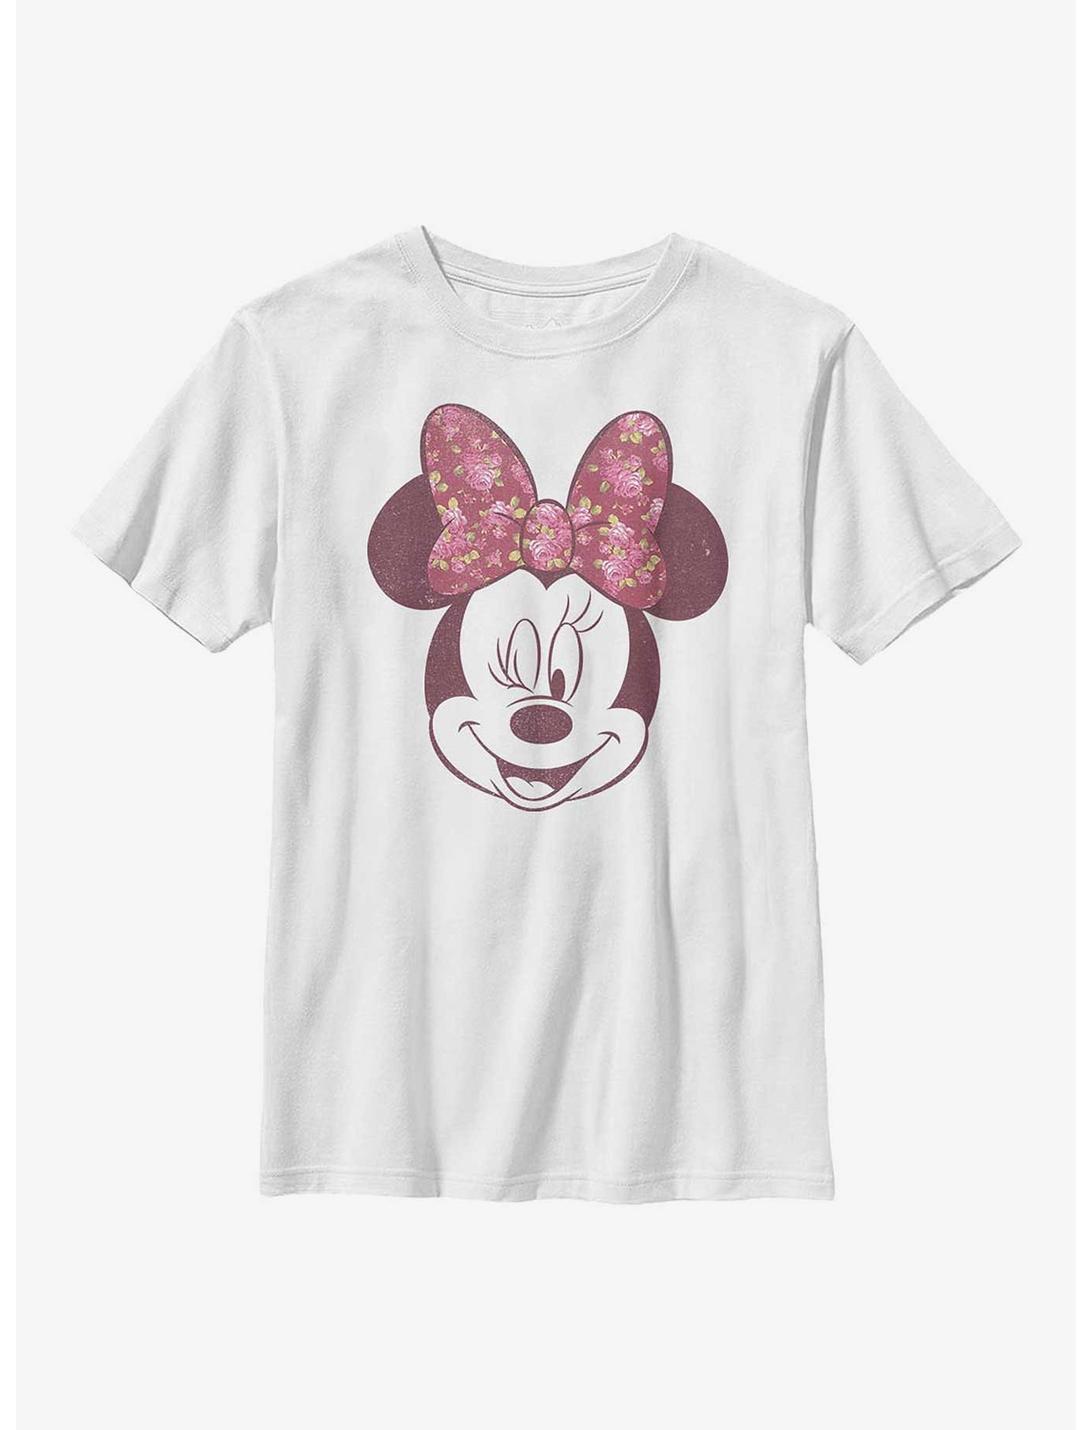 Disney Minnie Mouse Love Rose Youth T-Shirt, WHITE, hi-res